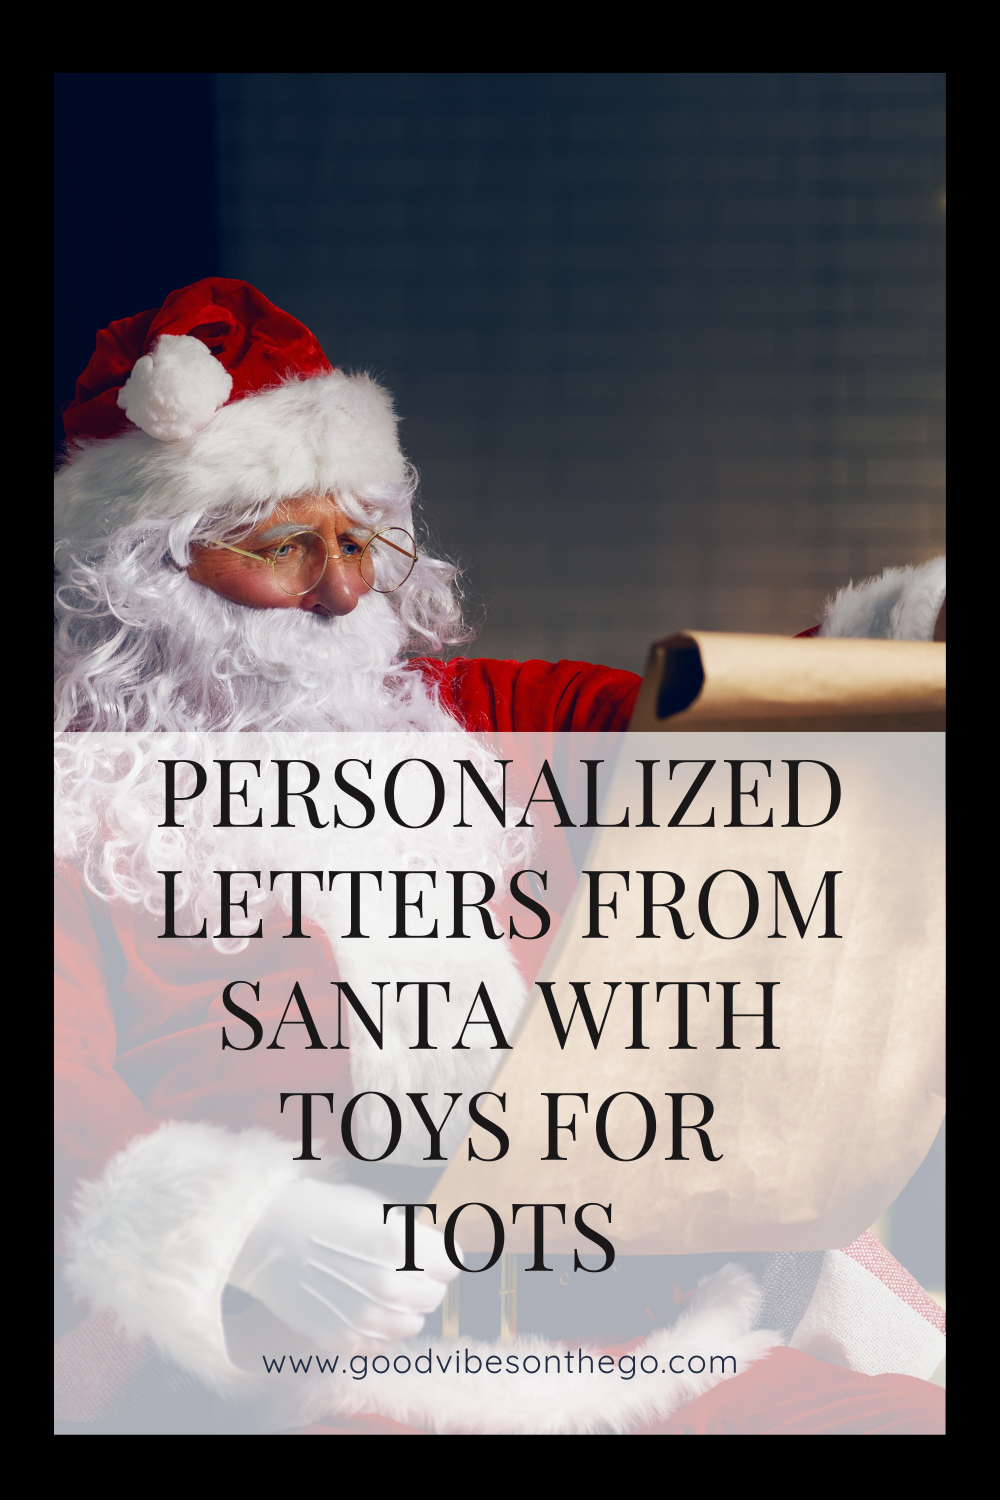 Personalized Letters from Santa with Toys for Tots